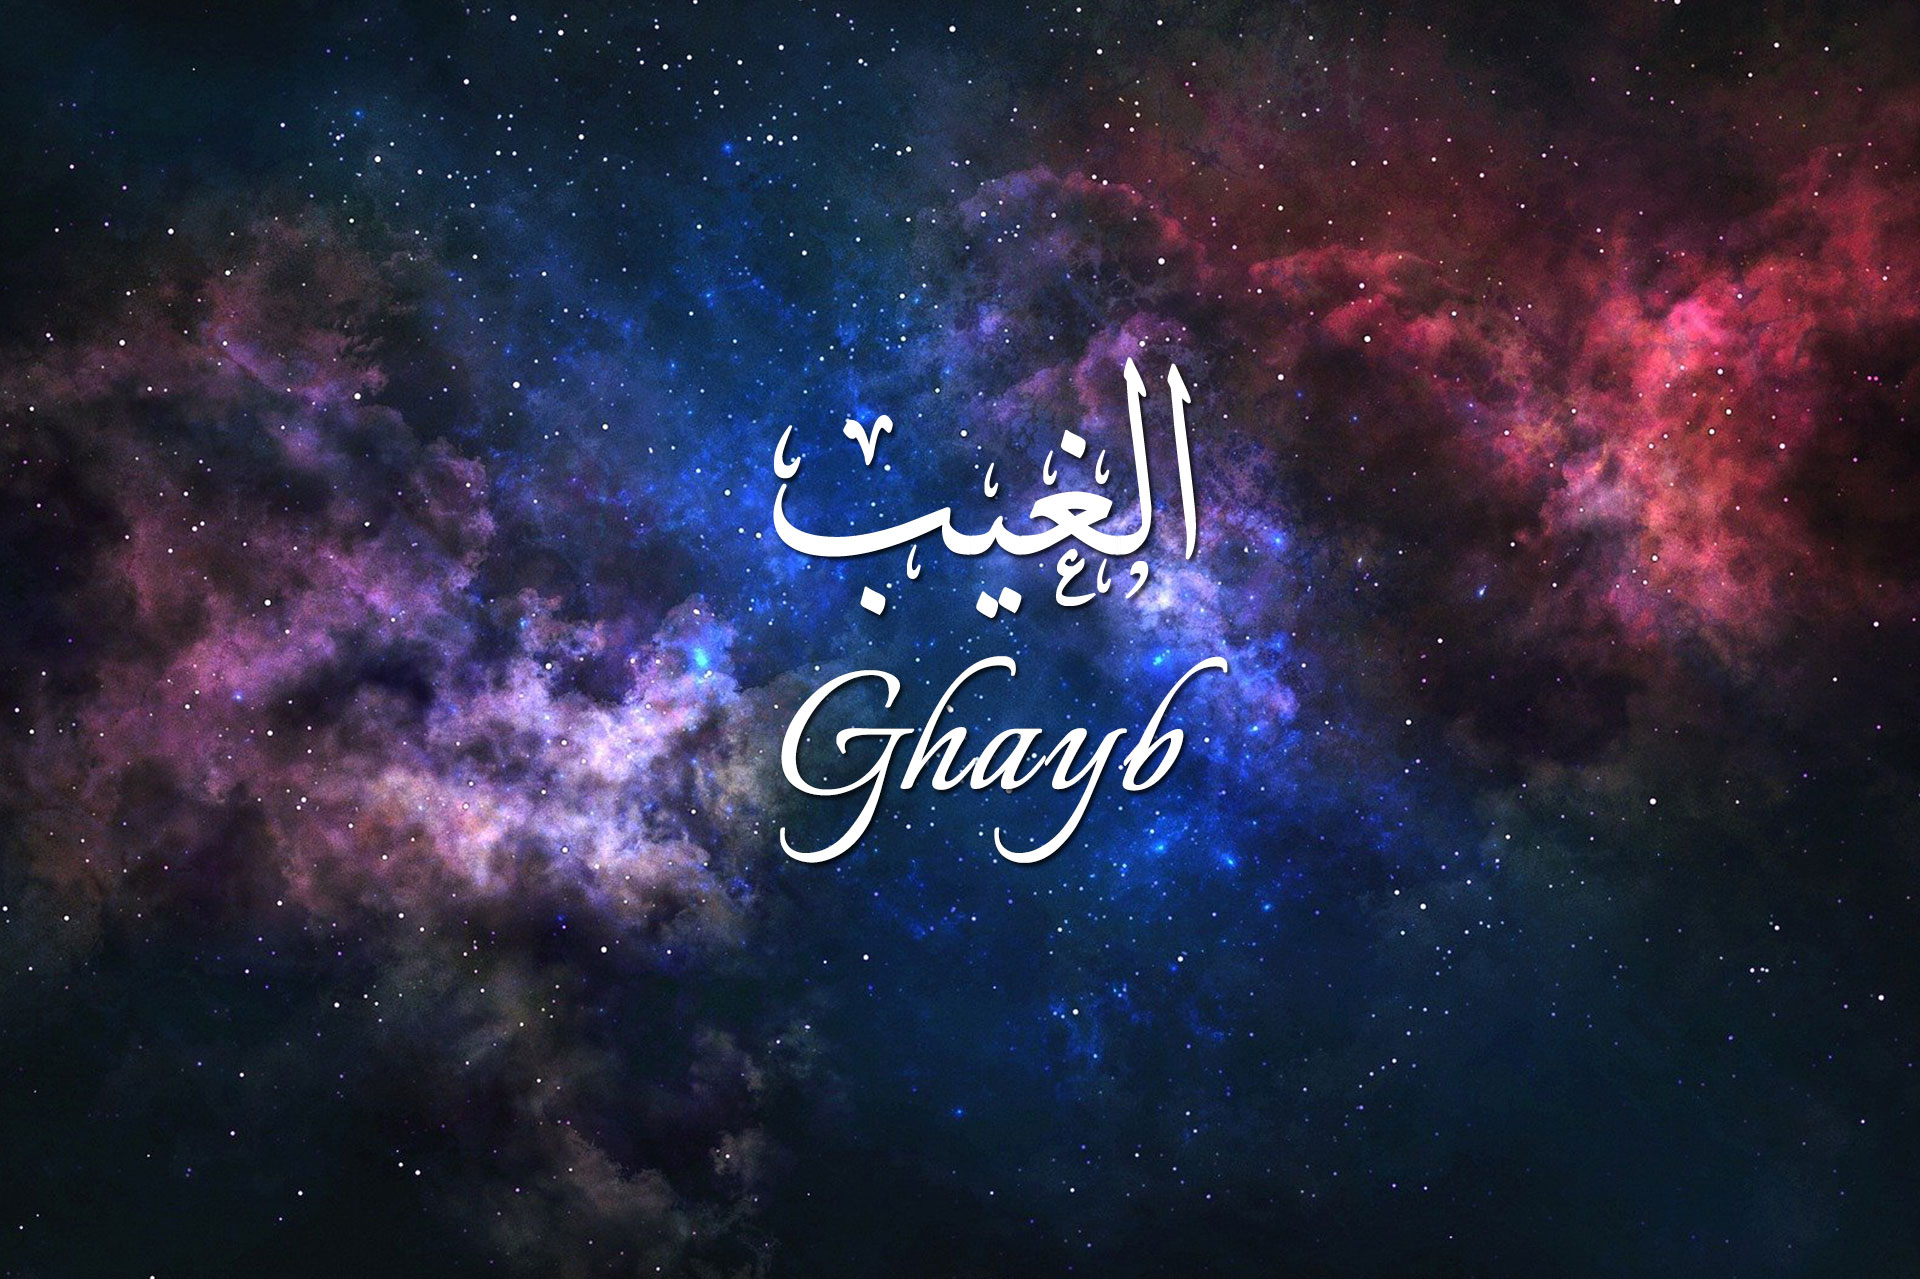 The Concept of “Ghayb” (Unseen) in the Qur’an